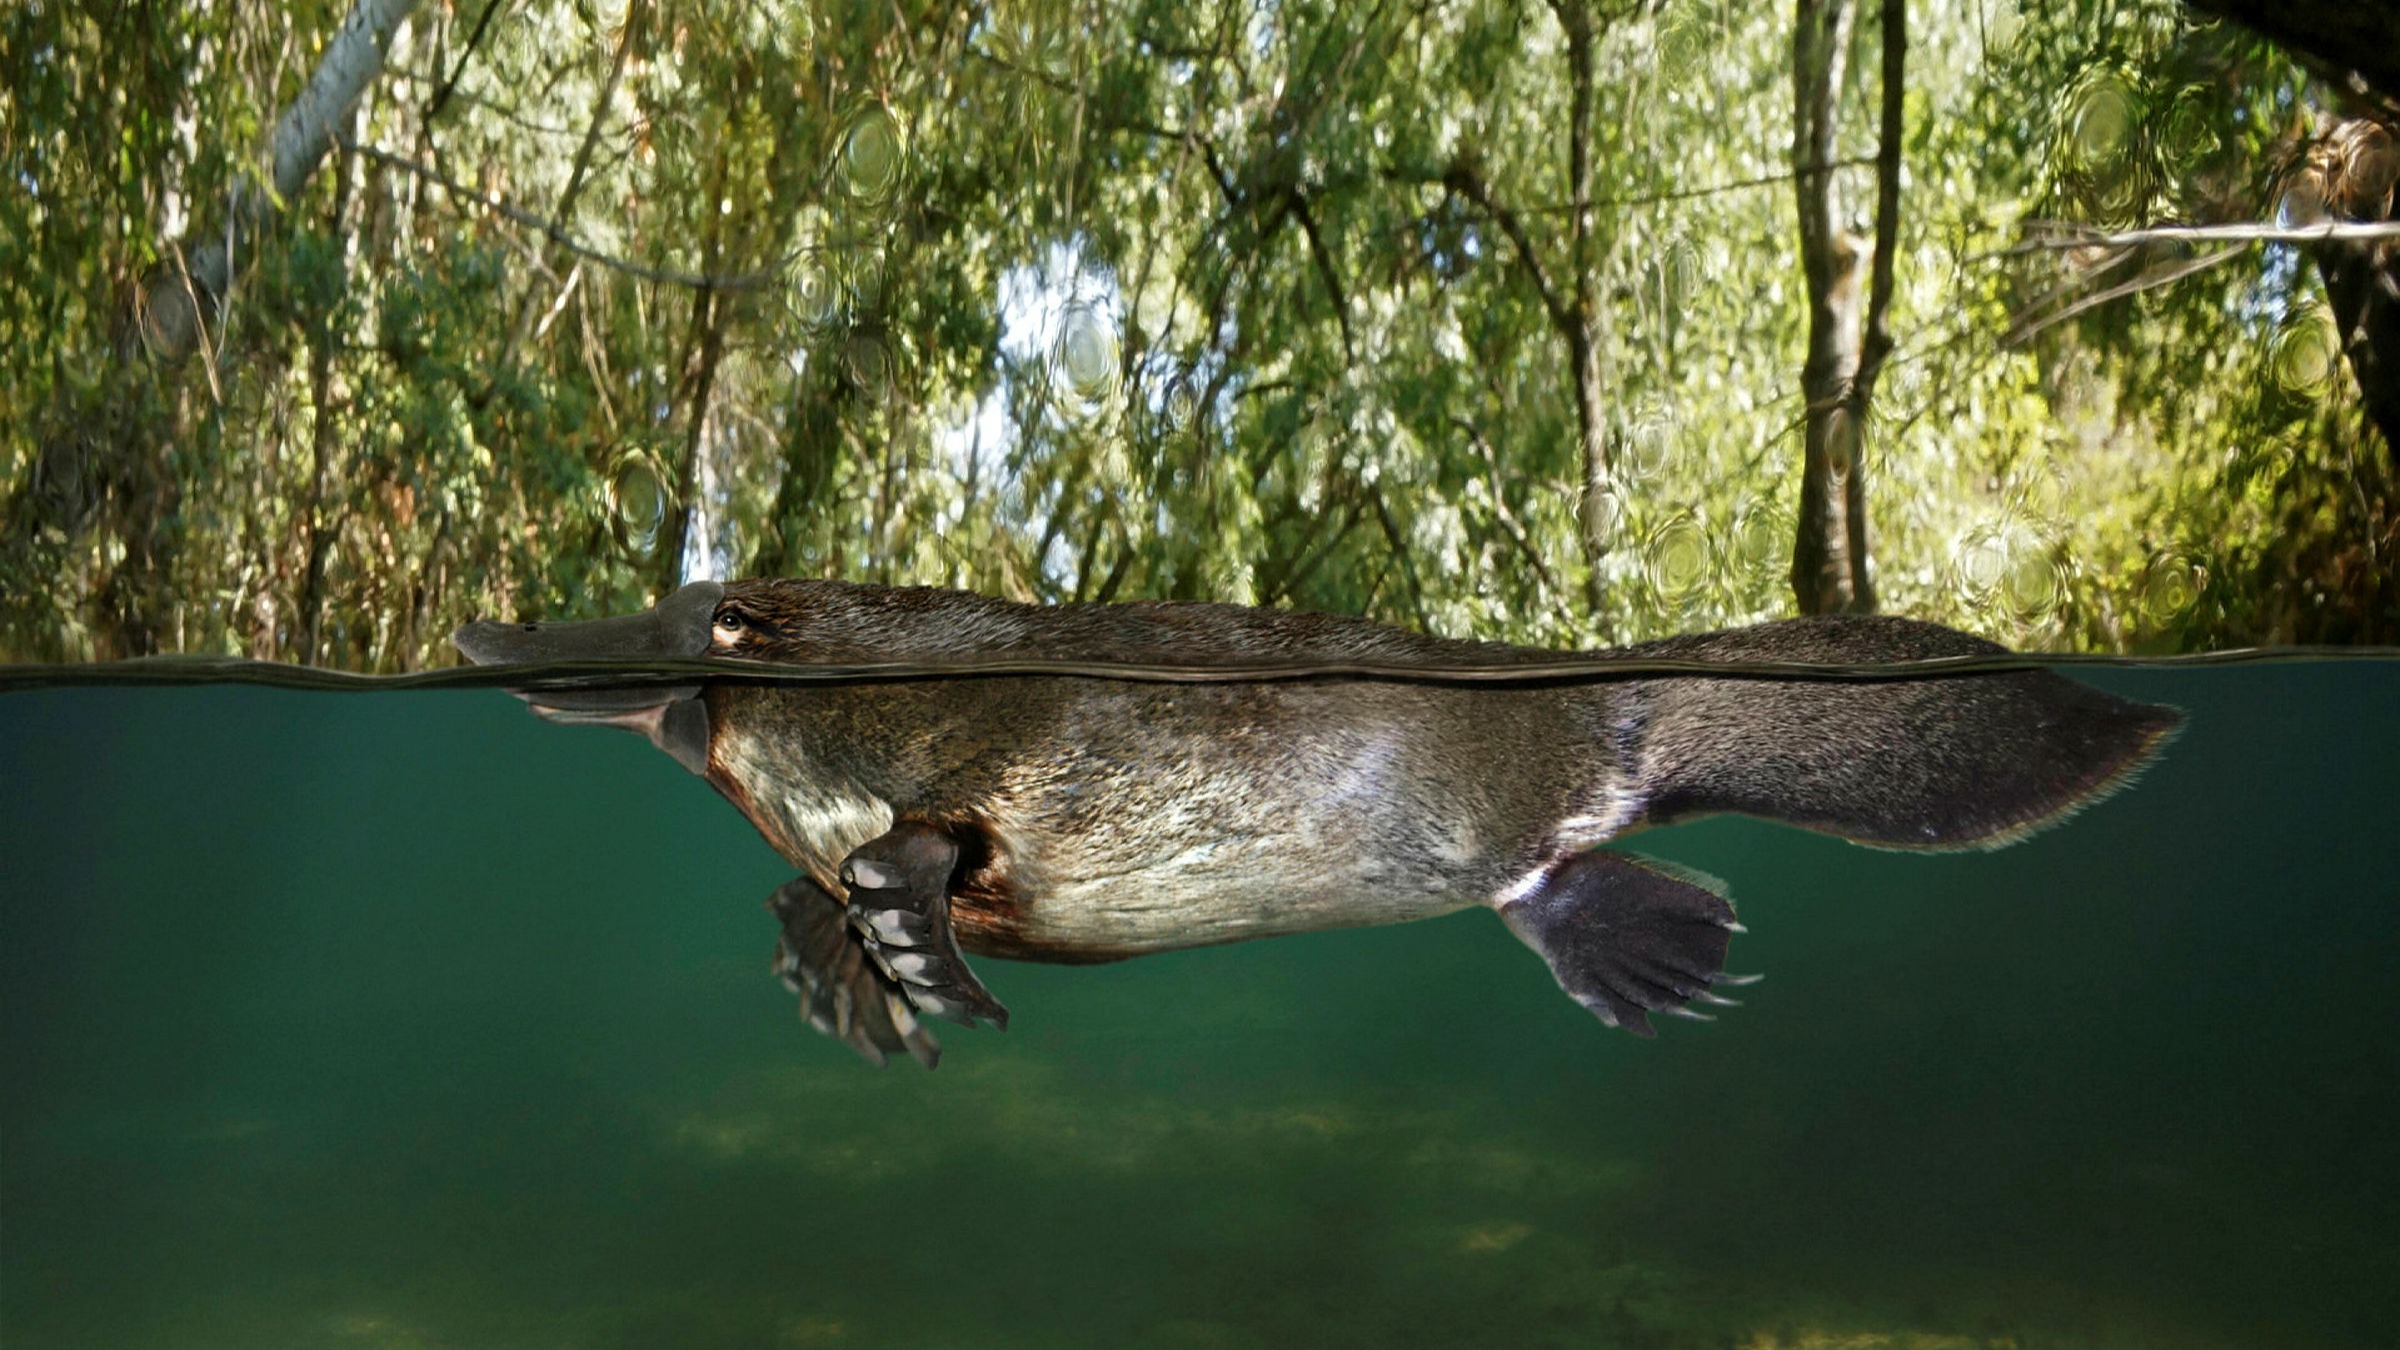 What the platypus could tell us about climate change | Financial Times